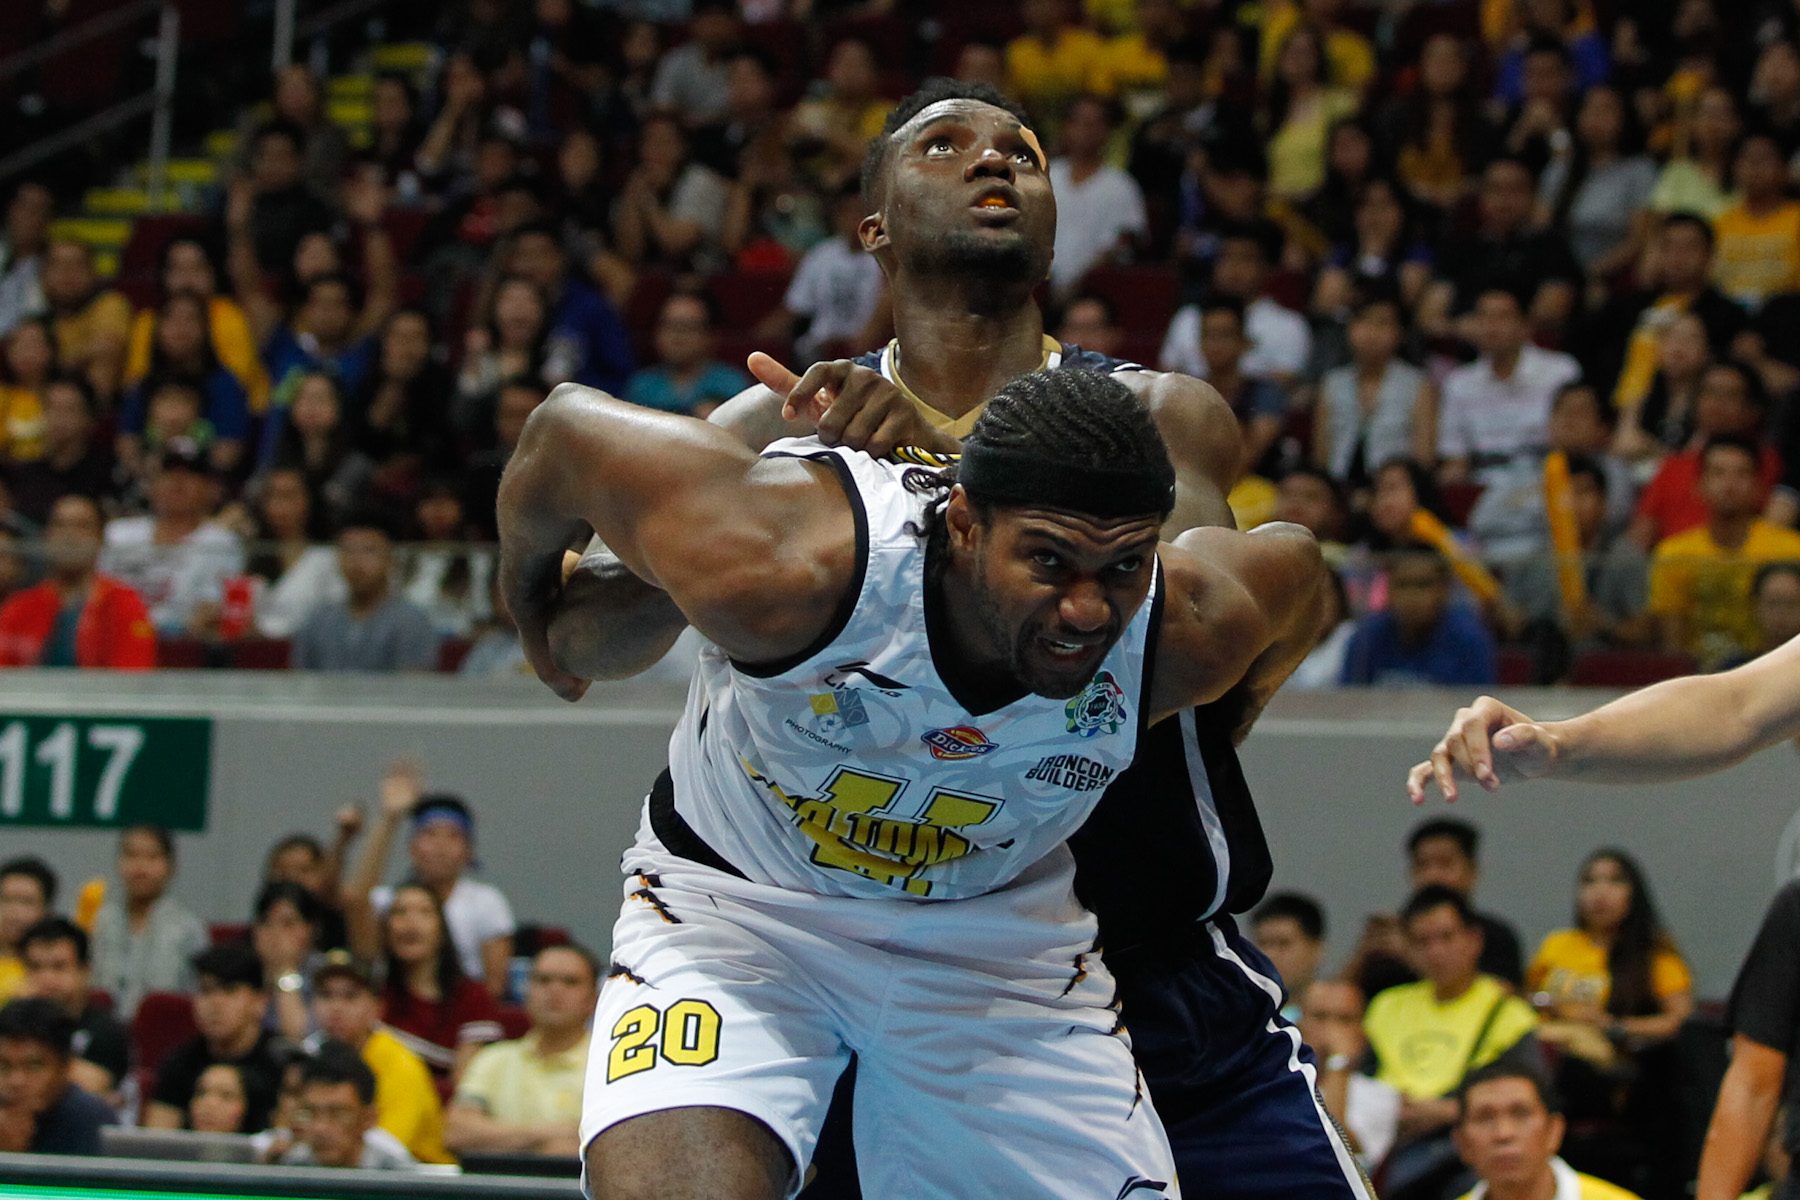 UST defeats NU to avenge first round loss